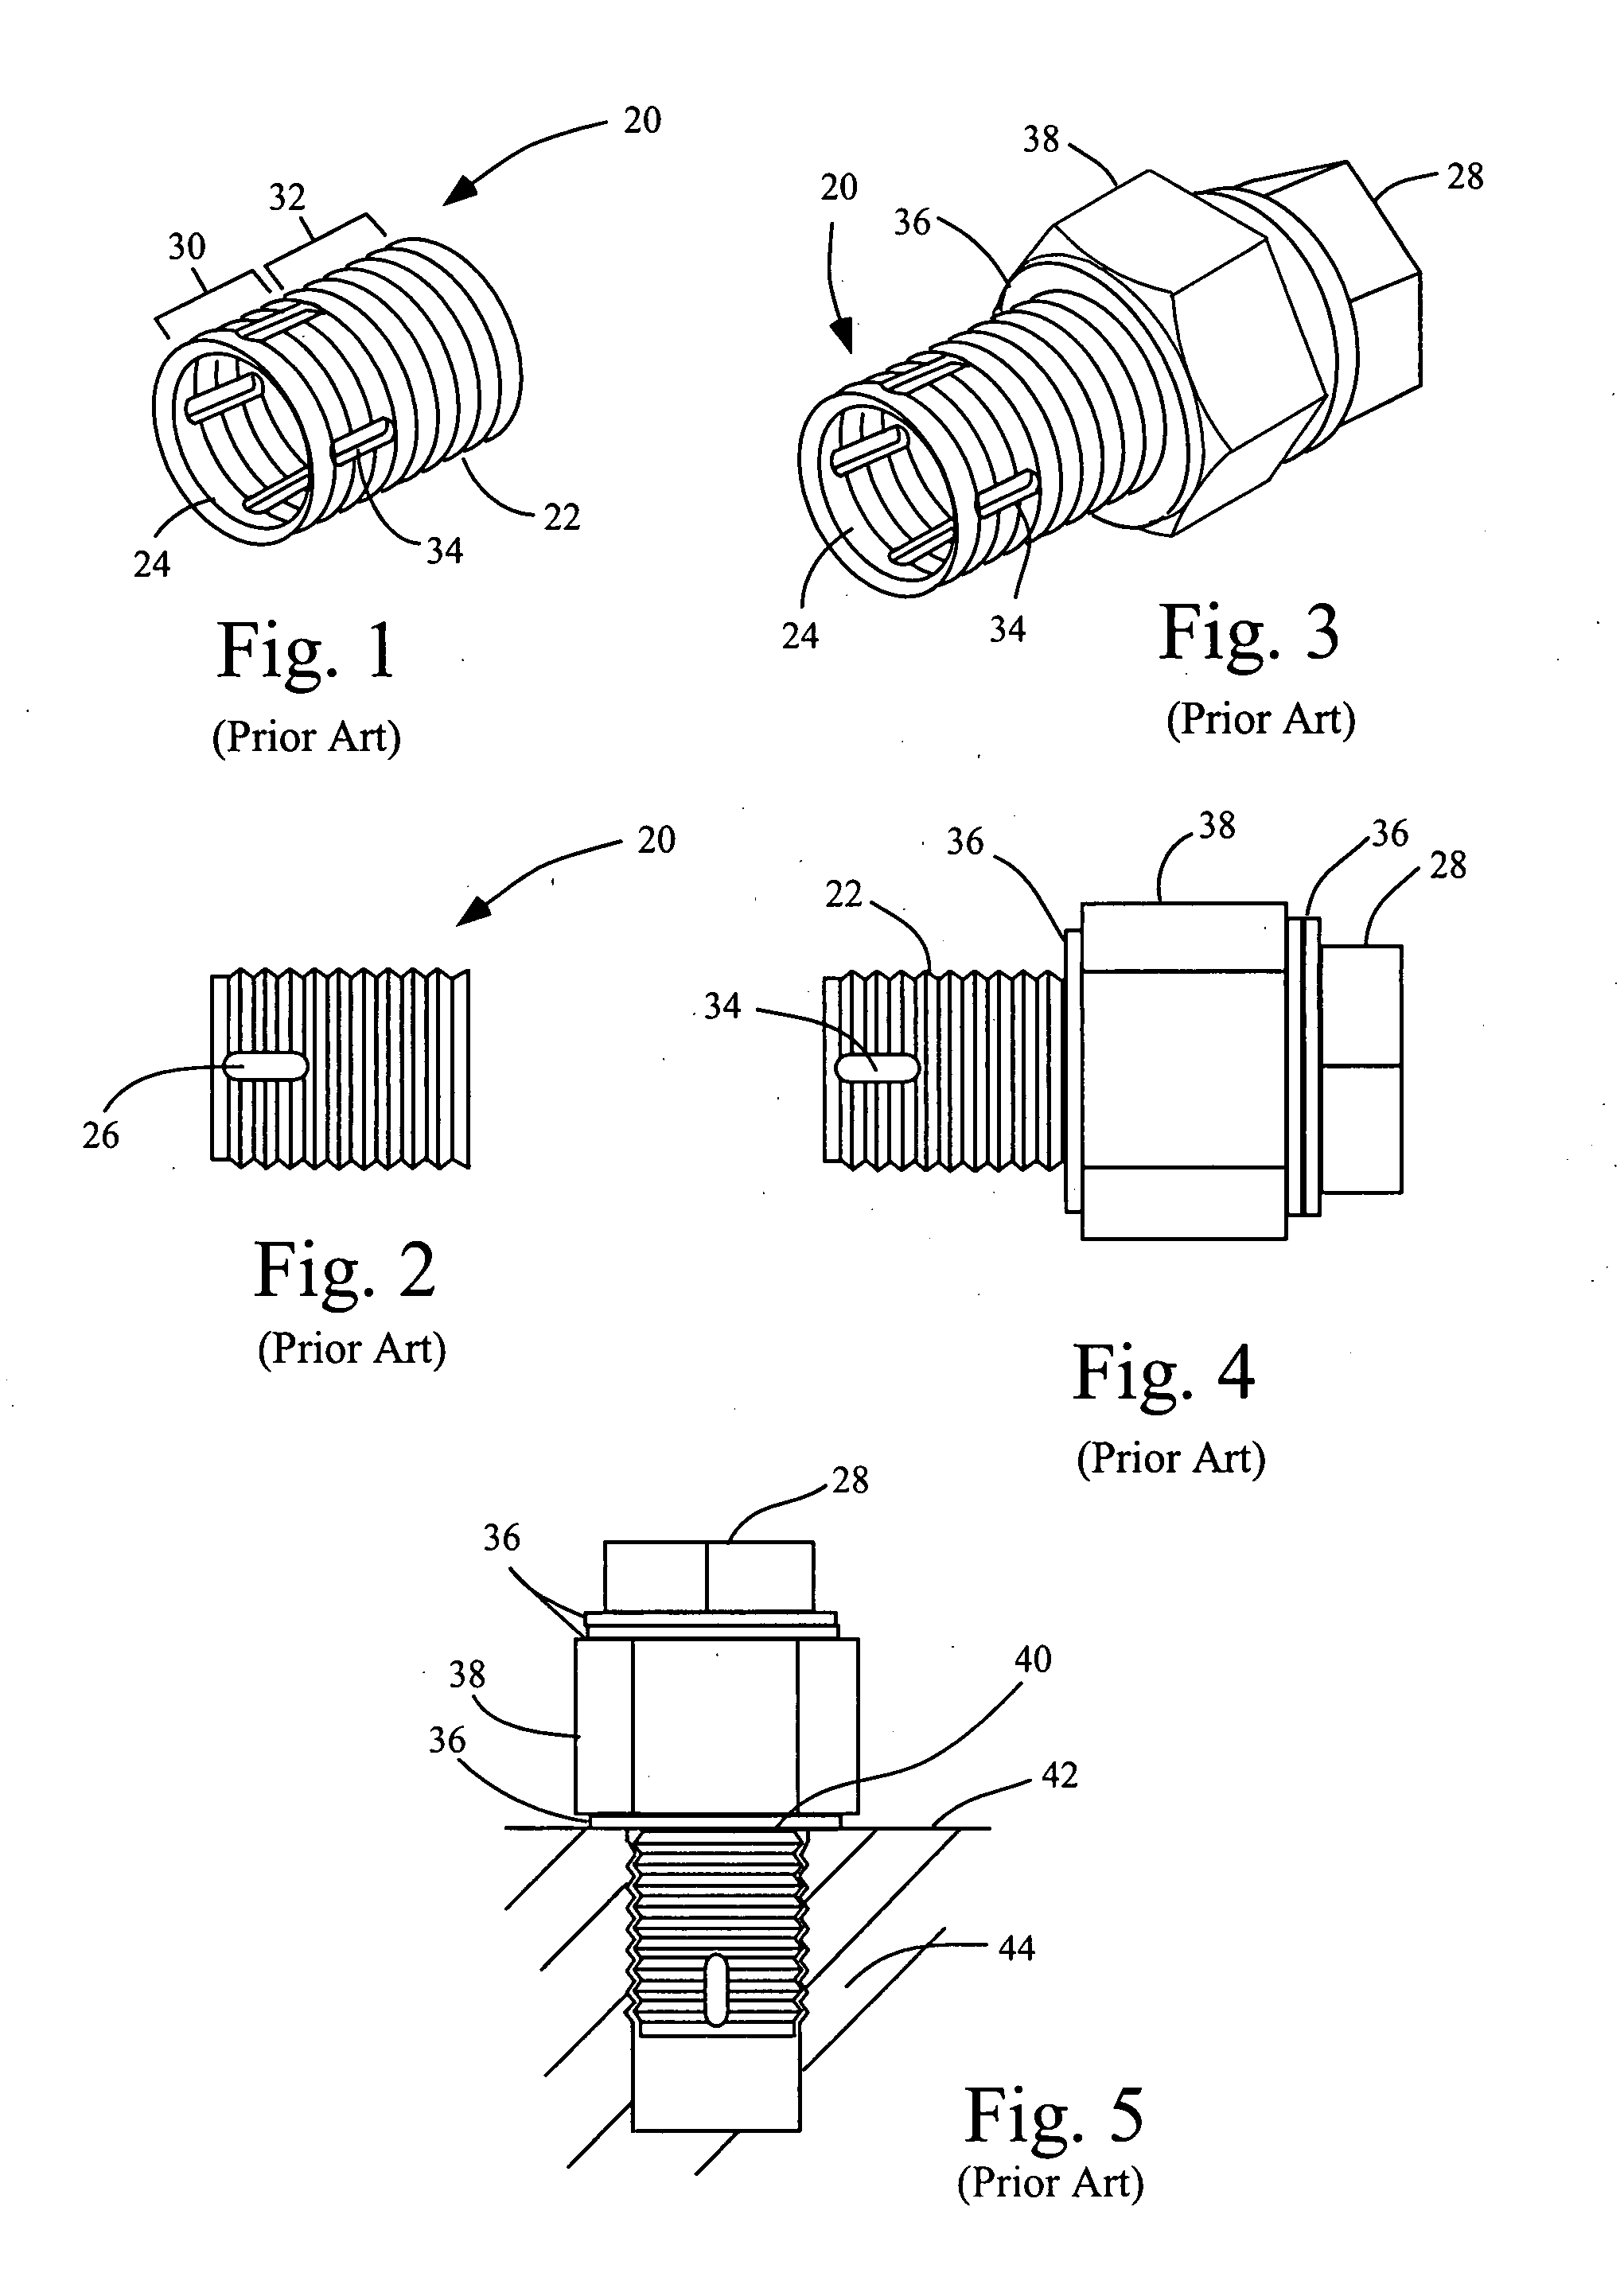 Self-tapping insert and method of utilizing the same to replace damaged bores and threads